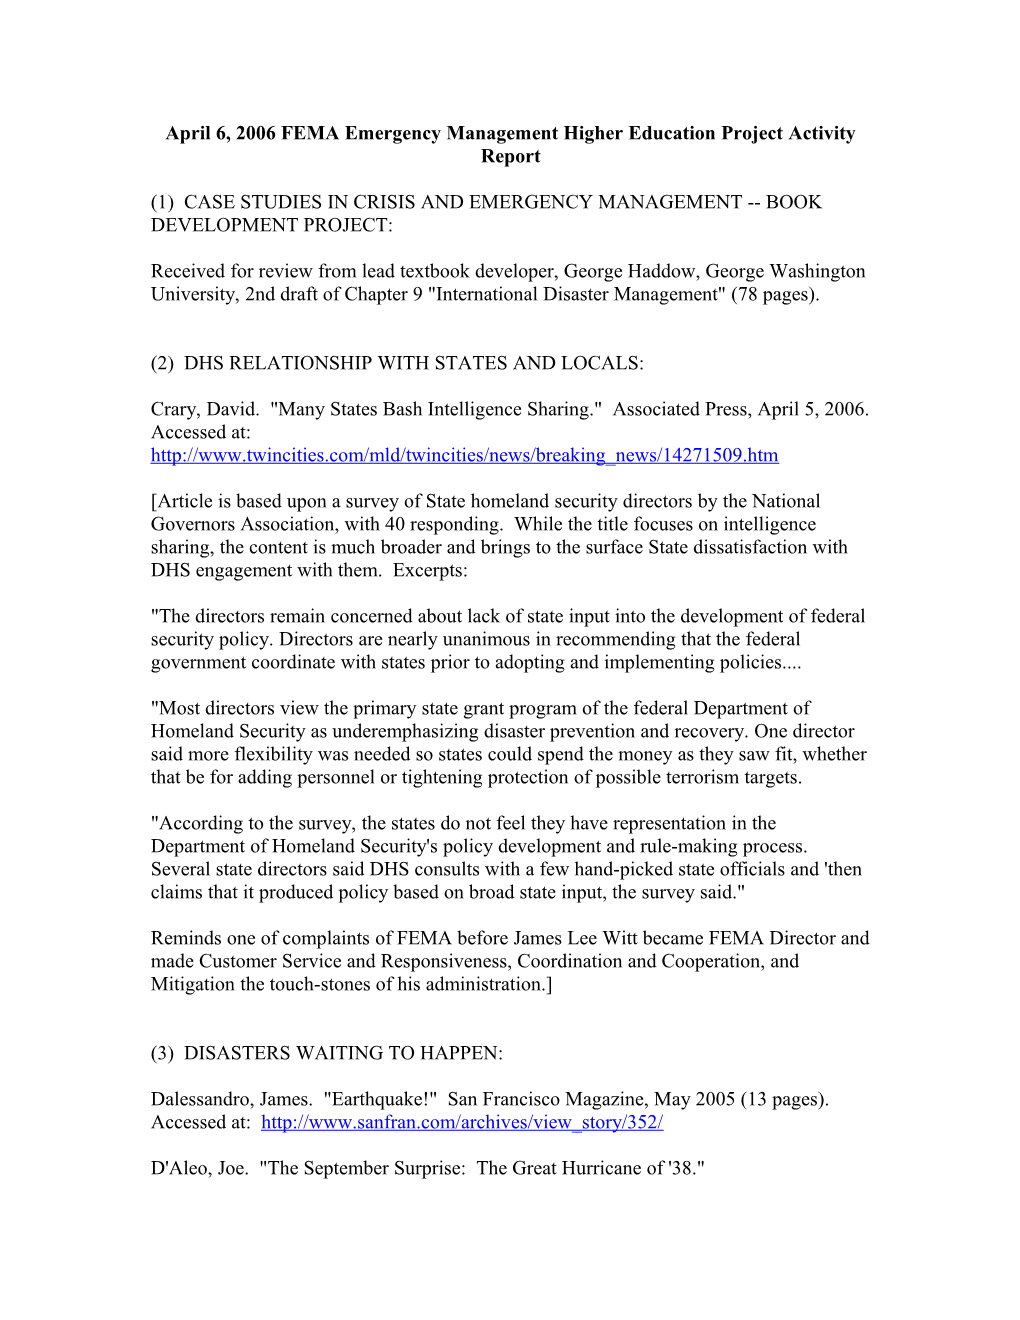 April 6, 2006 FEMA Emergency Management Higher Education Project Activity Report